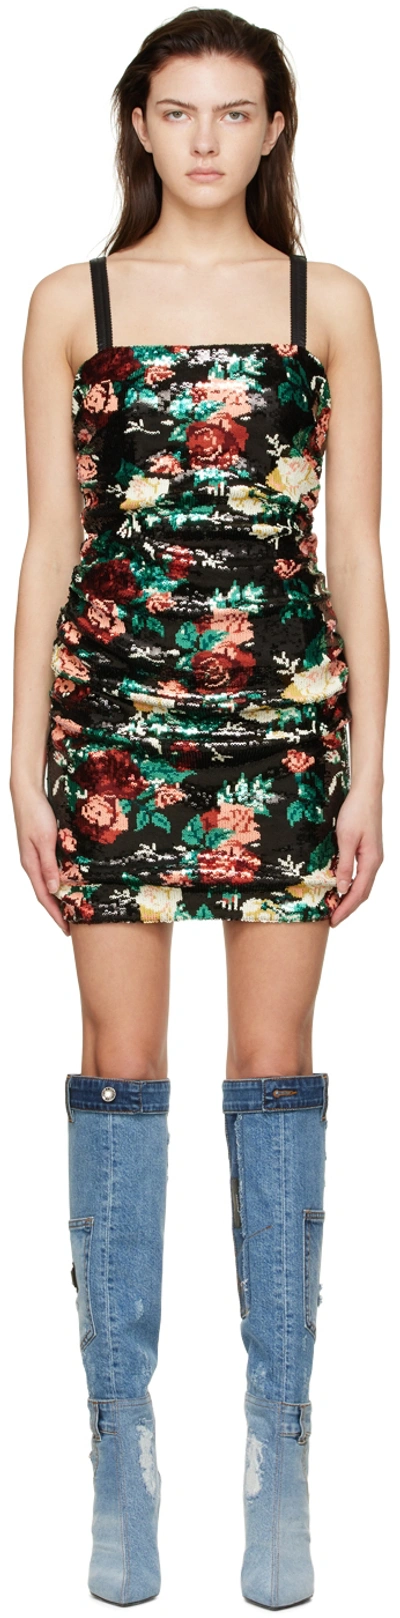 Dolce & Gabbana Sequinned Floral Motif Mini Dress In Black,green,red,white